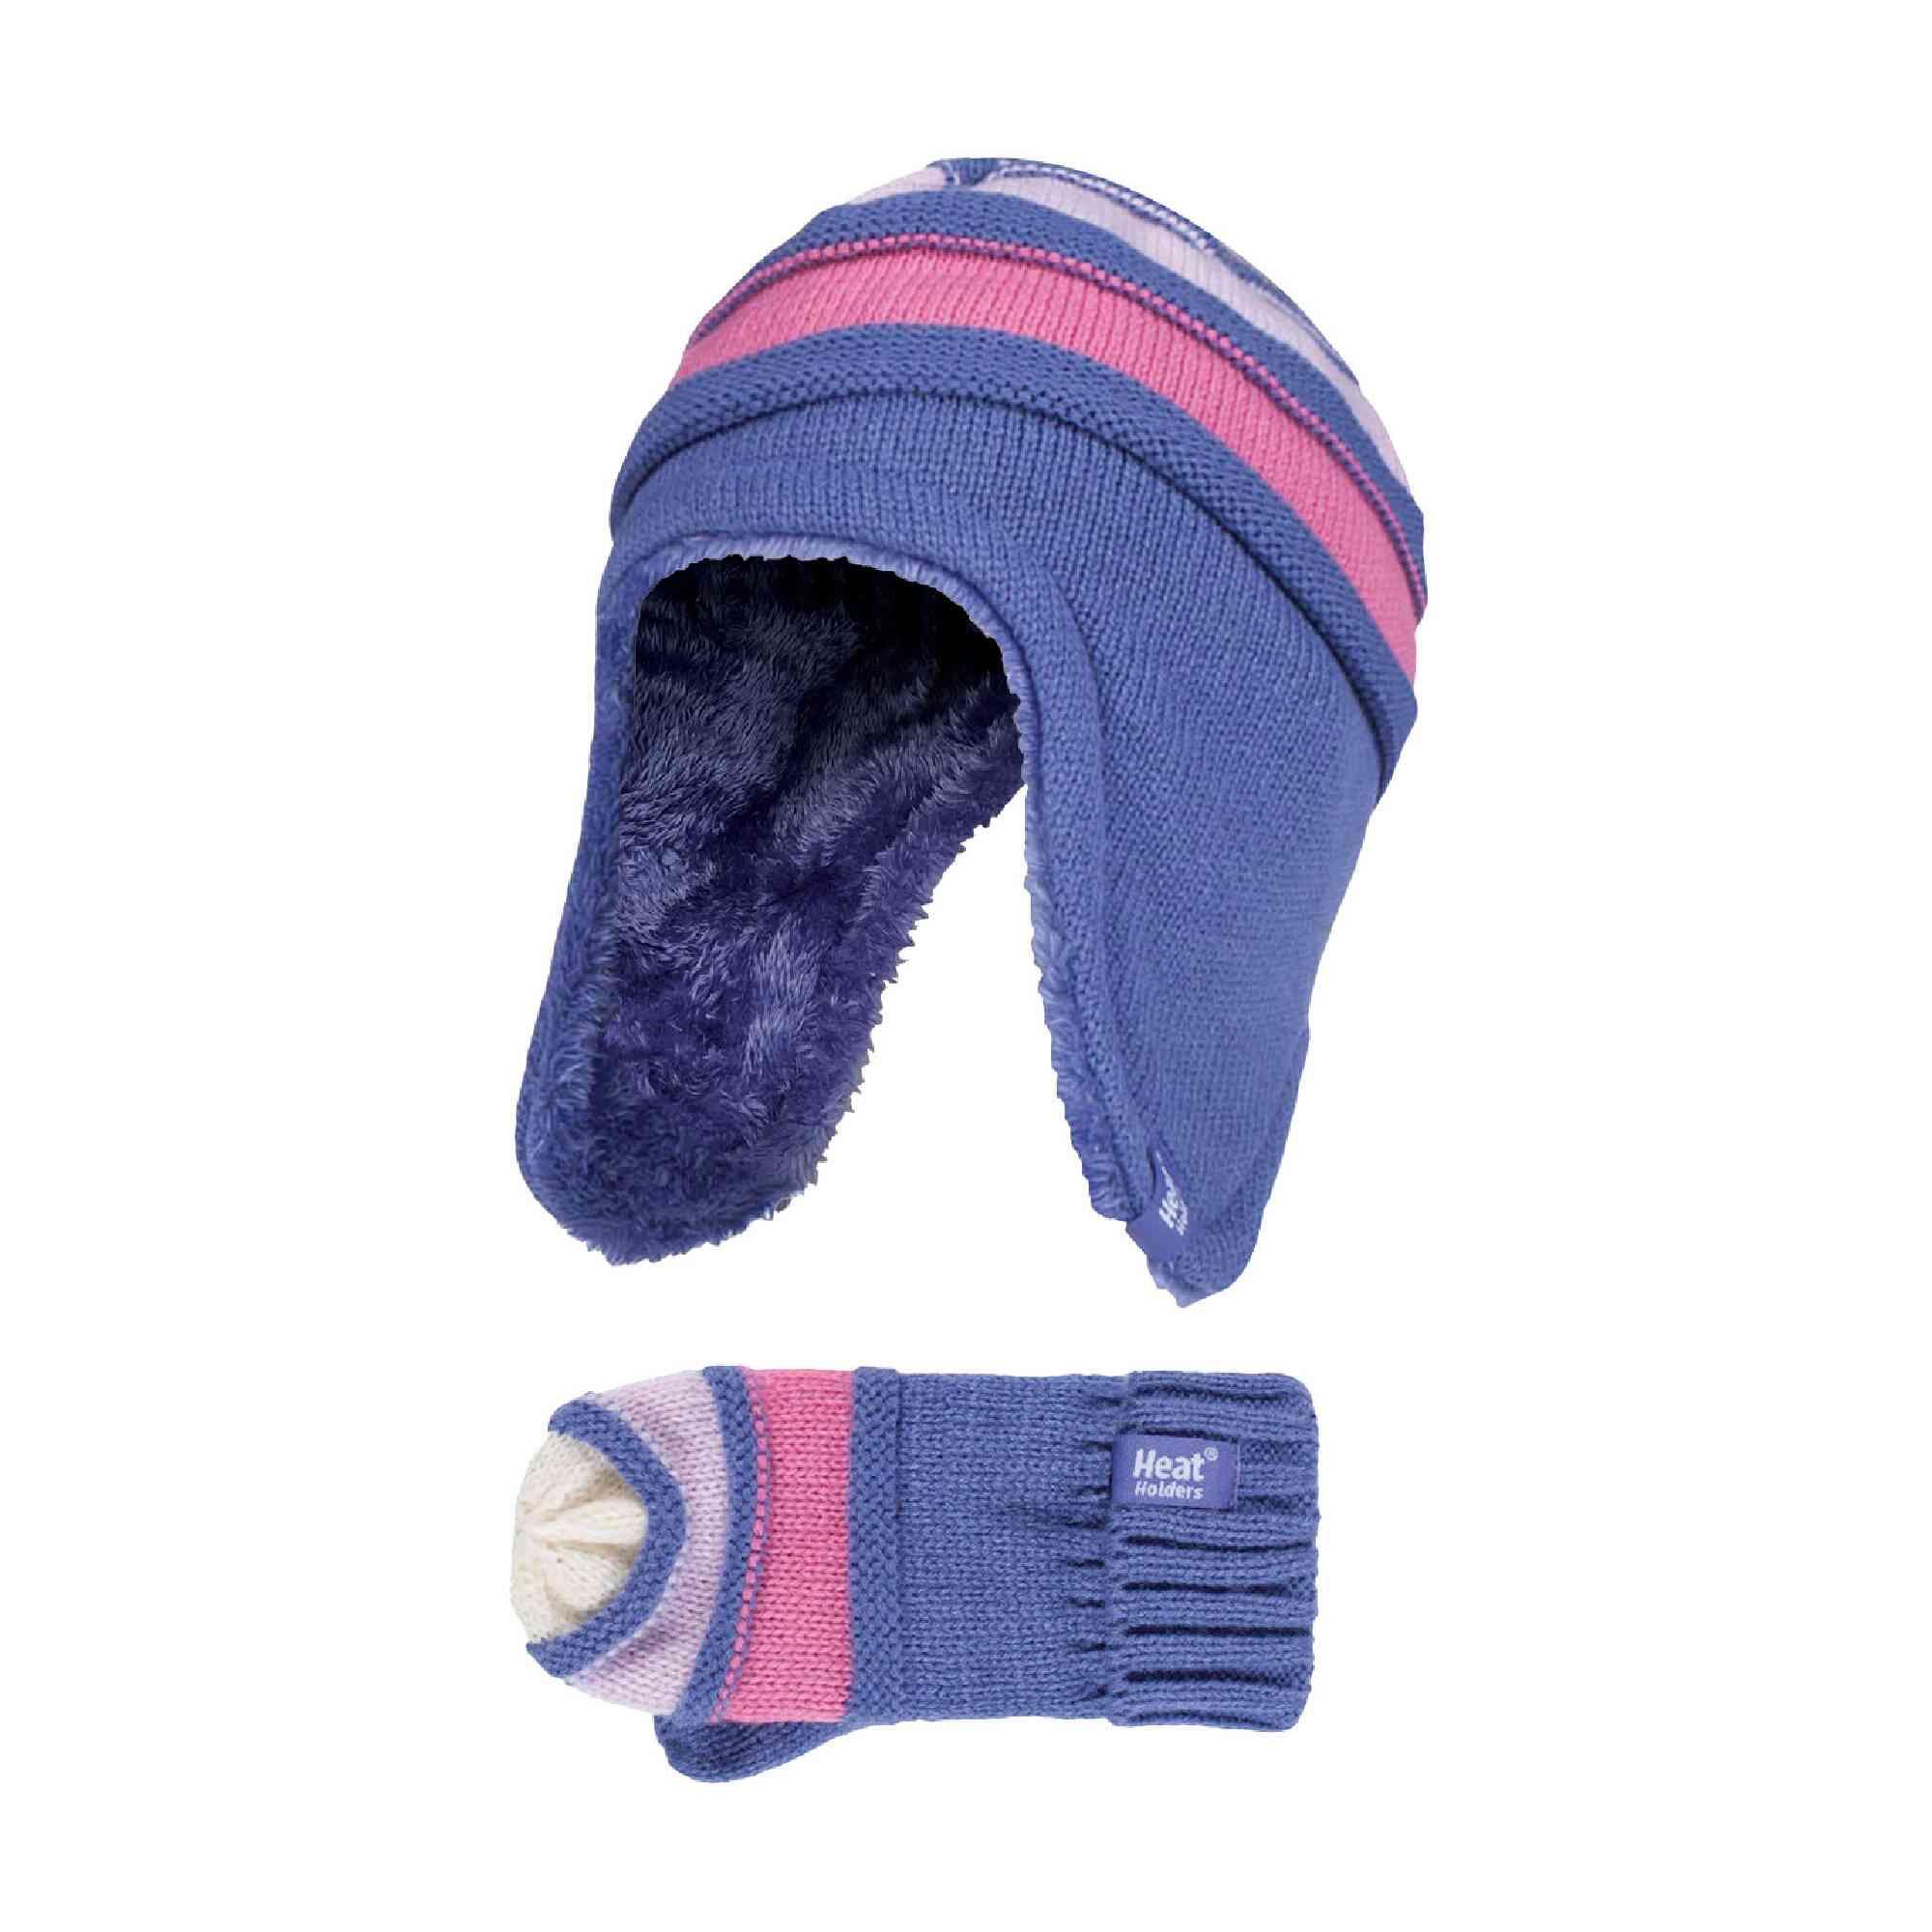 HEAT HOLDERS Kids Winter Warm Fleece Lined Thermal Beanie Hat and Mittens with Ear Flaps